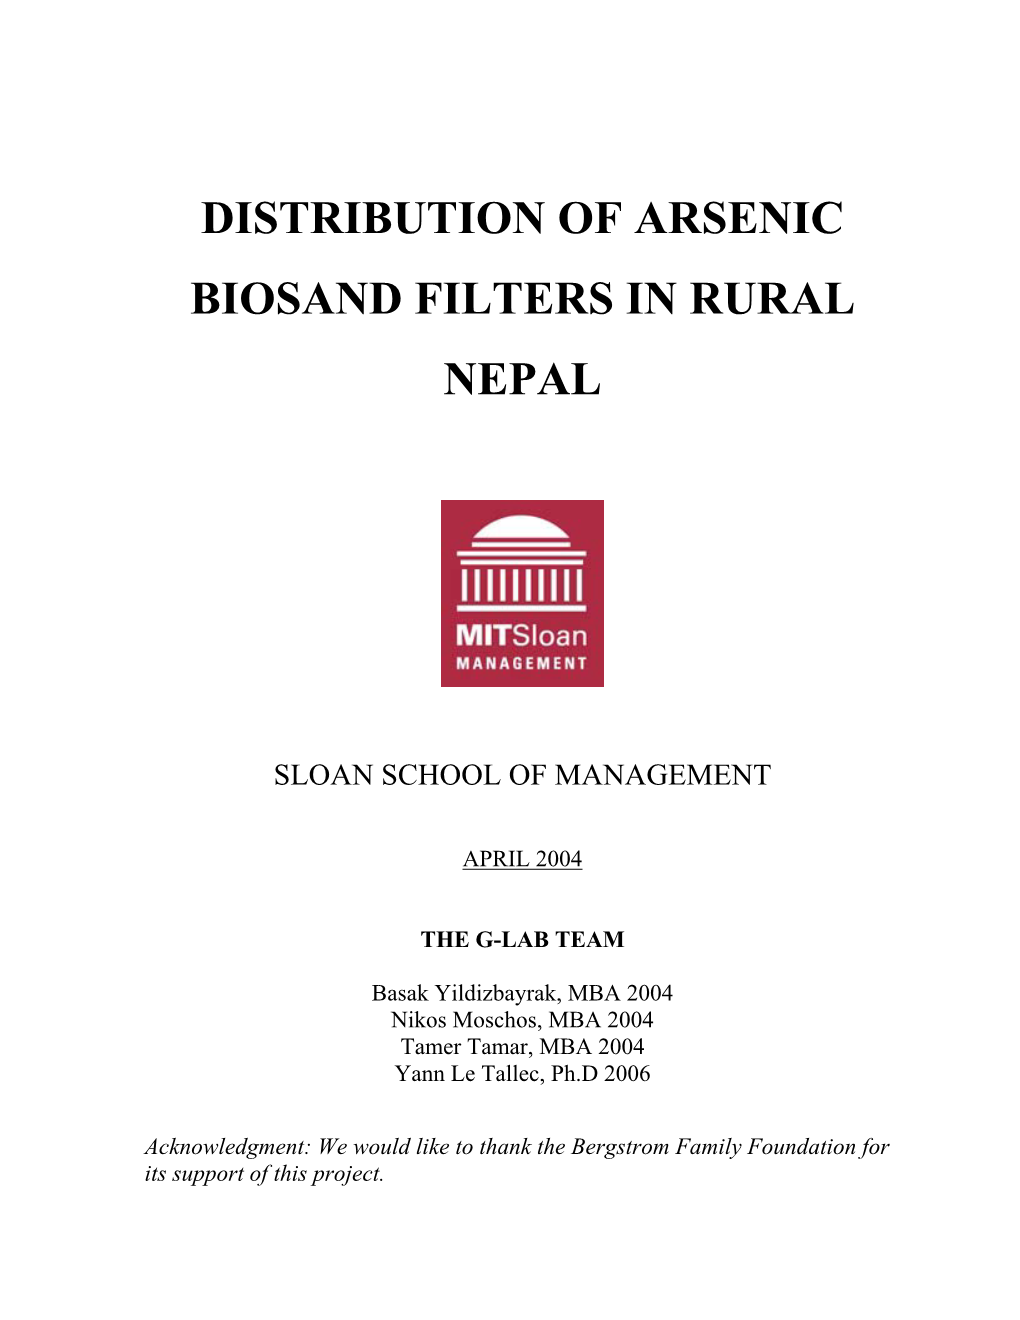 Distribution of Arsenic Biosand Filters in Rural Nepal